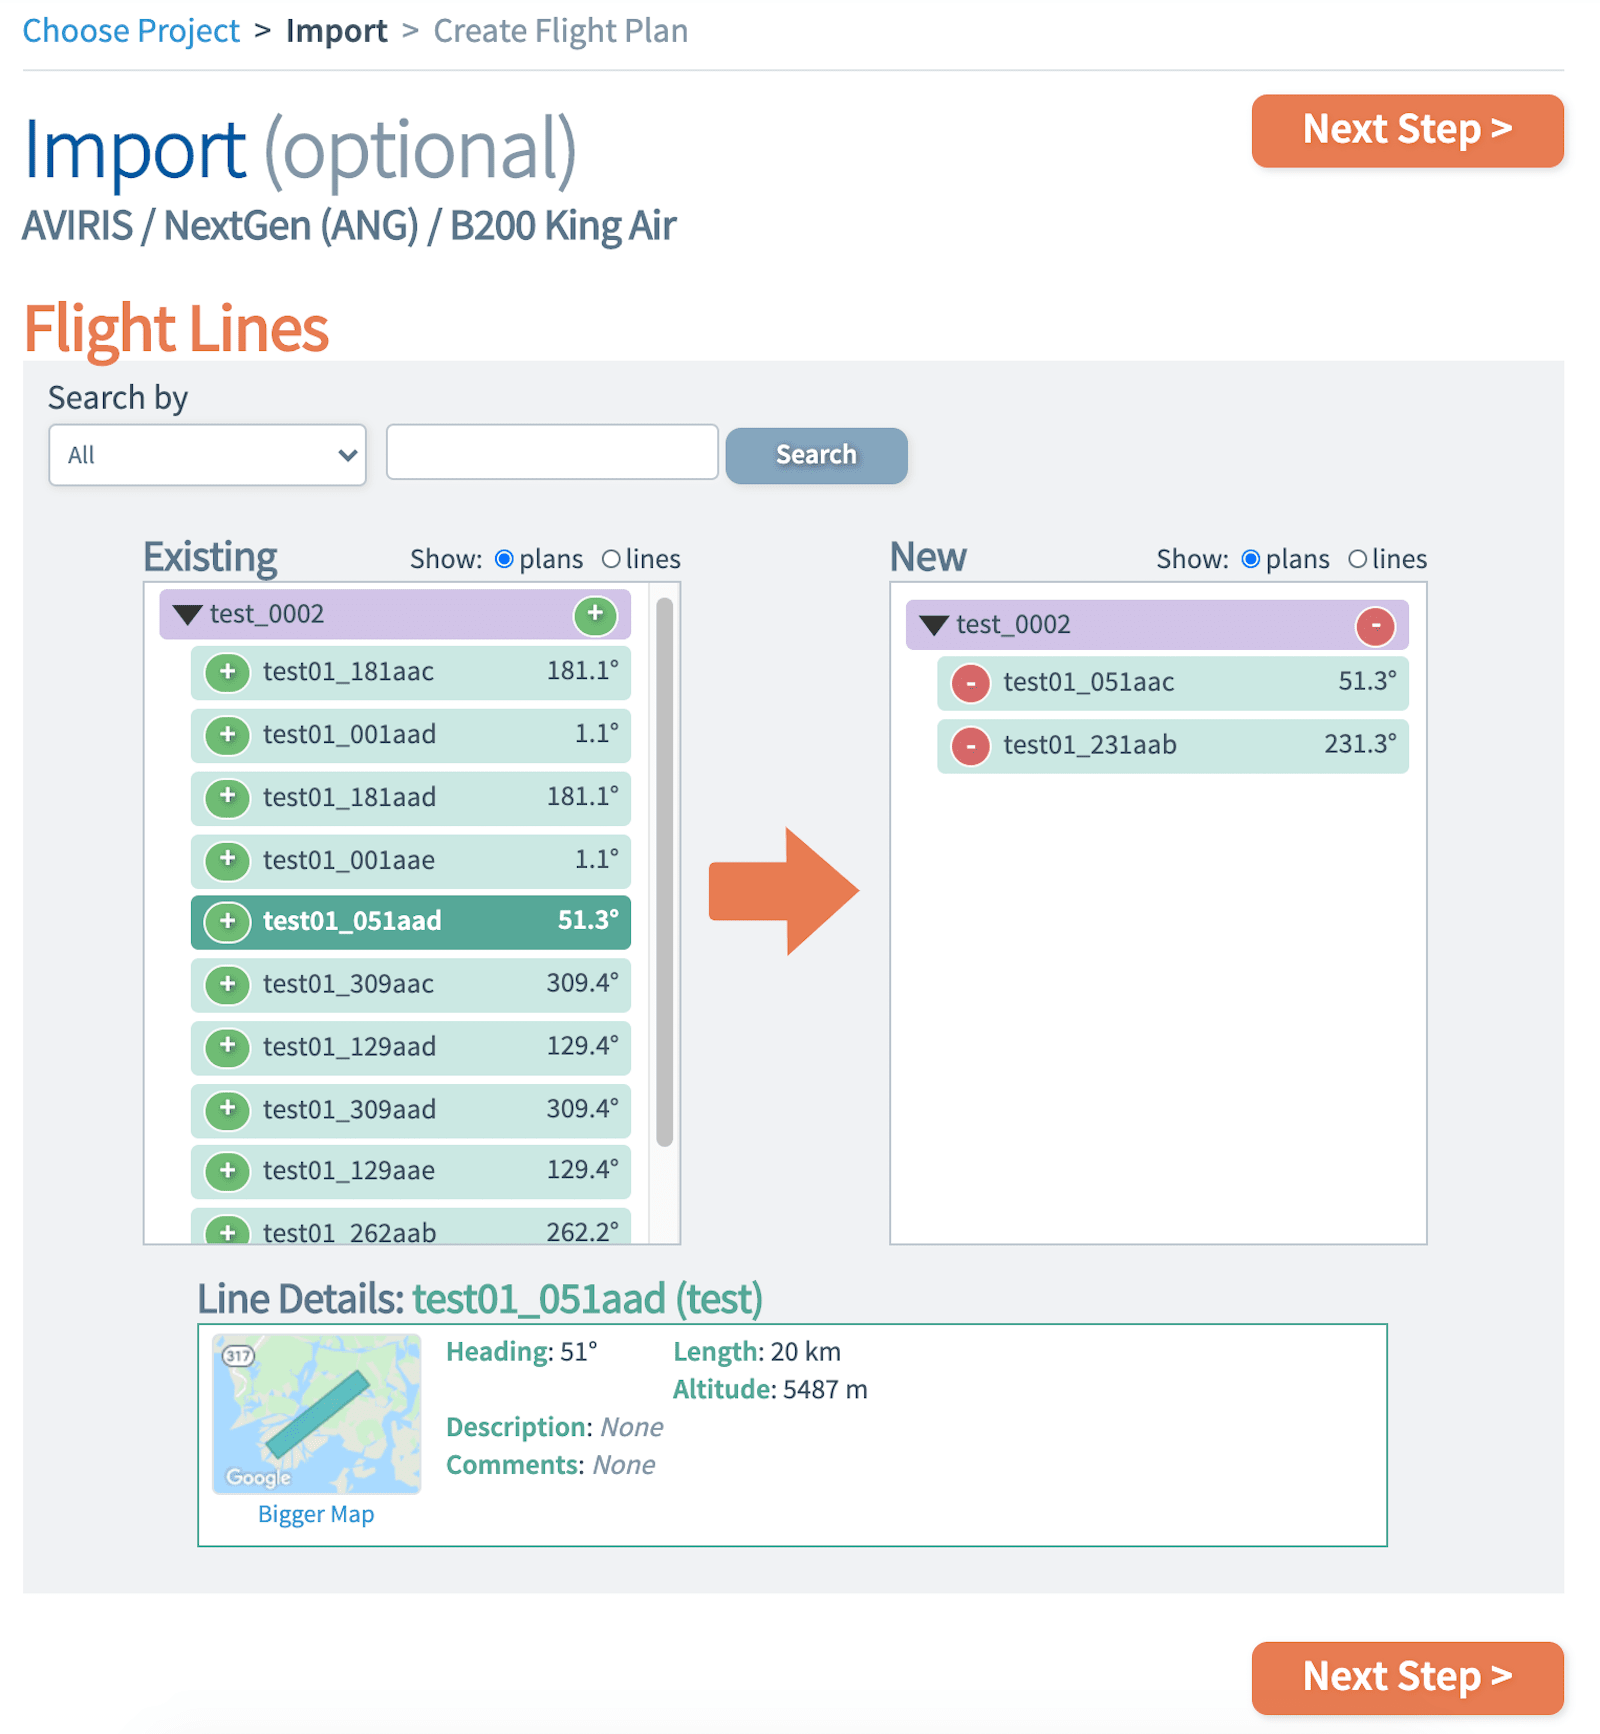 Screenshot of the Import page